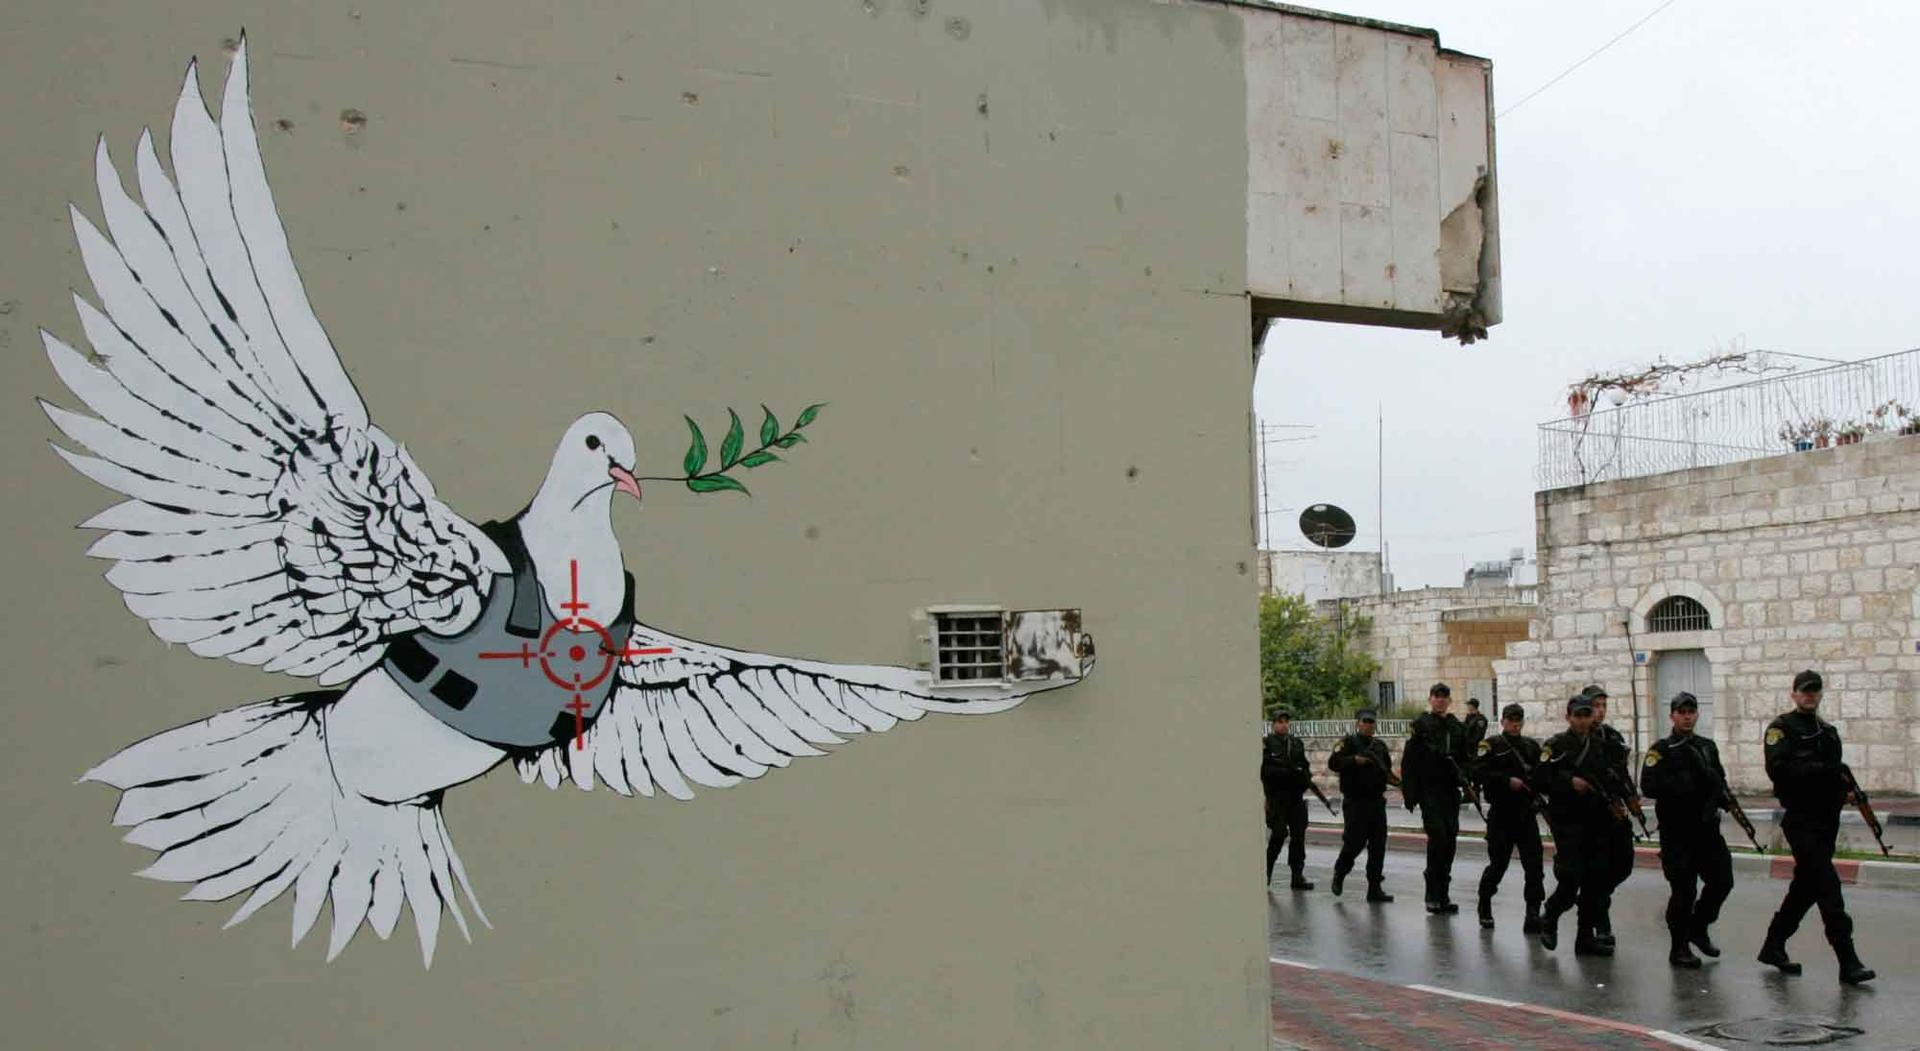 Members of the Palestinian security forces patrol near a mural by graffiti artist Banksy during a visit by then US President George W. Bush to the West Bank town of Bethlehem January 10, 2008.